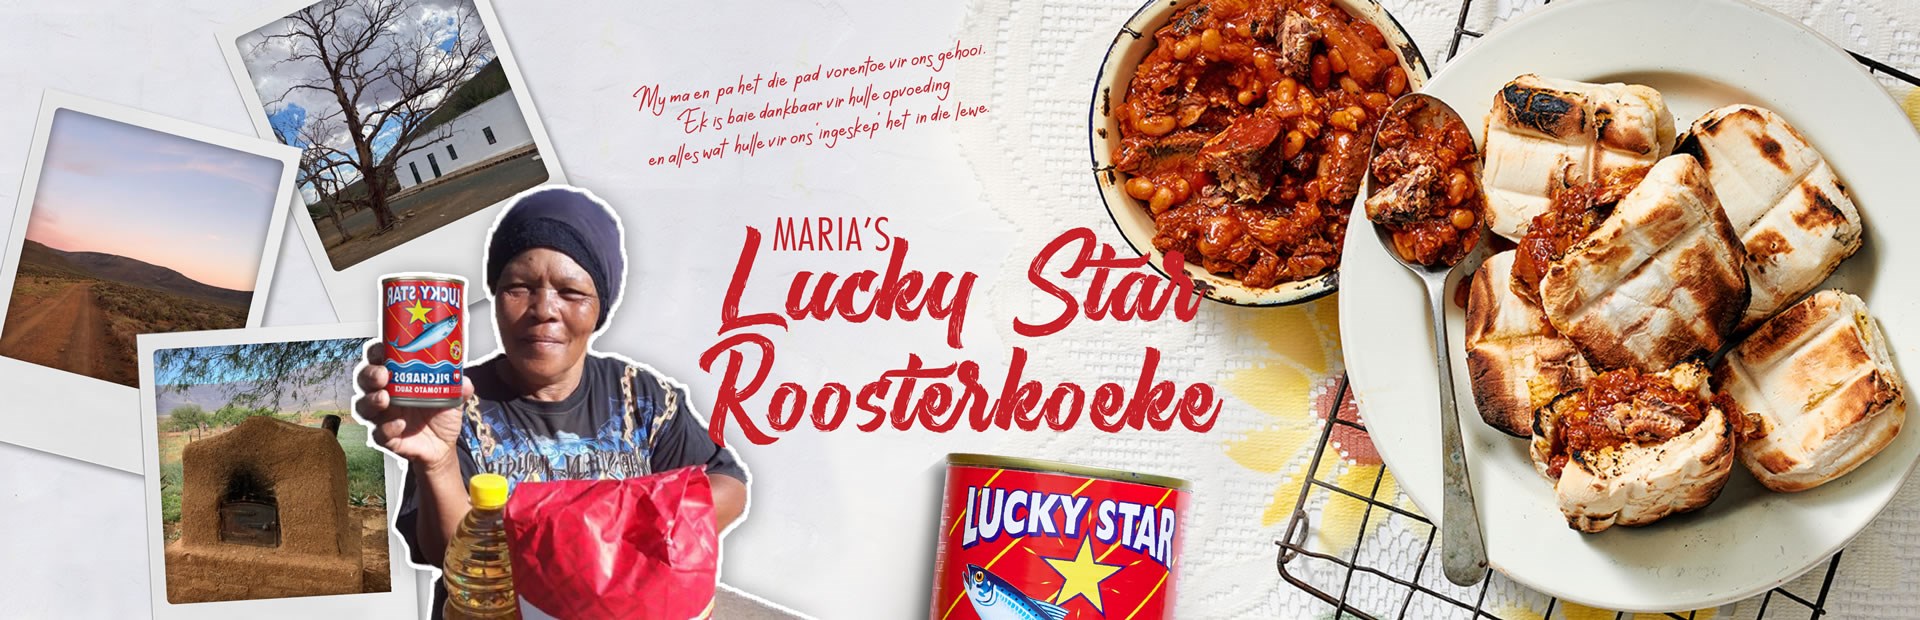 MARIA’S Lucky Star Roosterkoeke